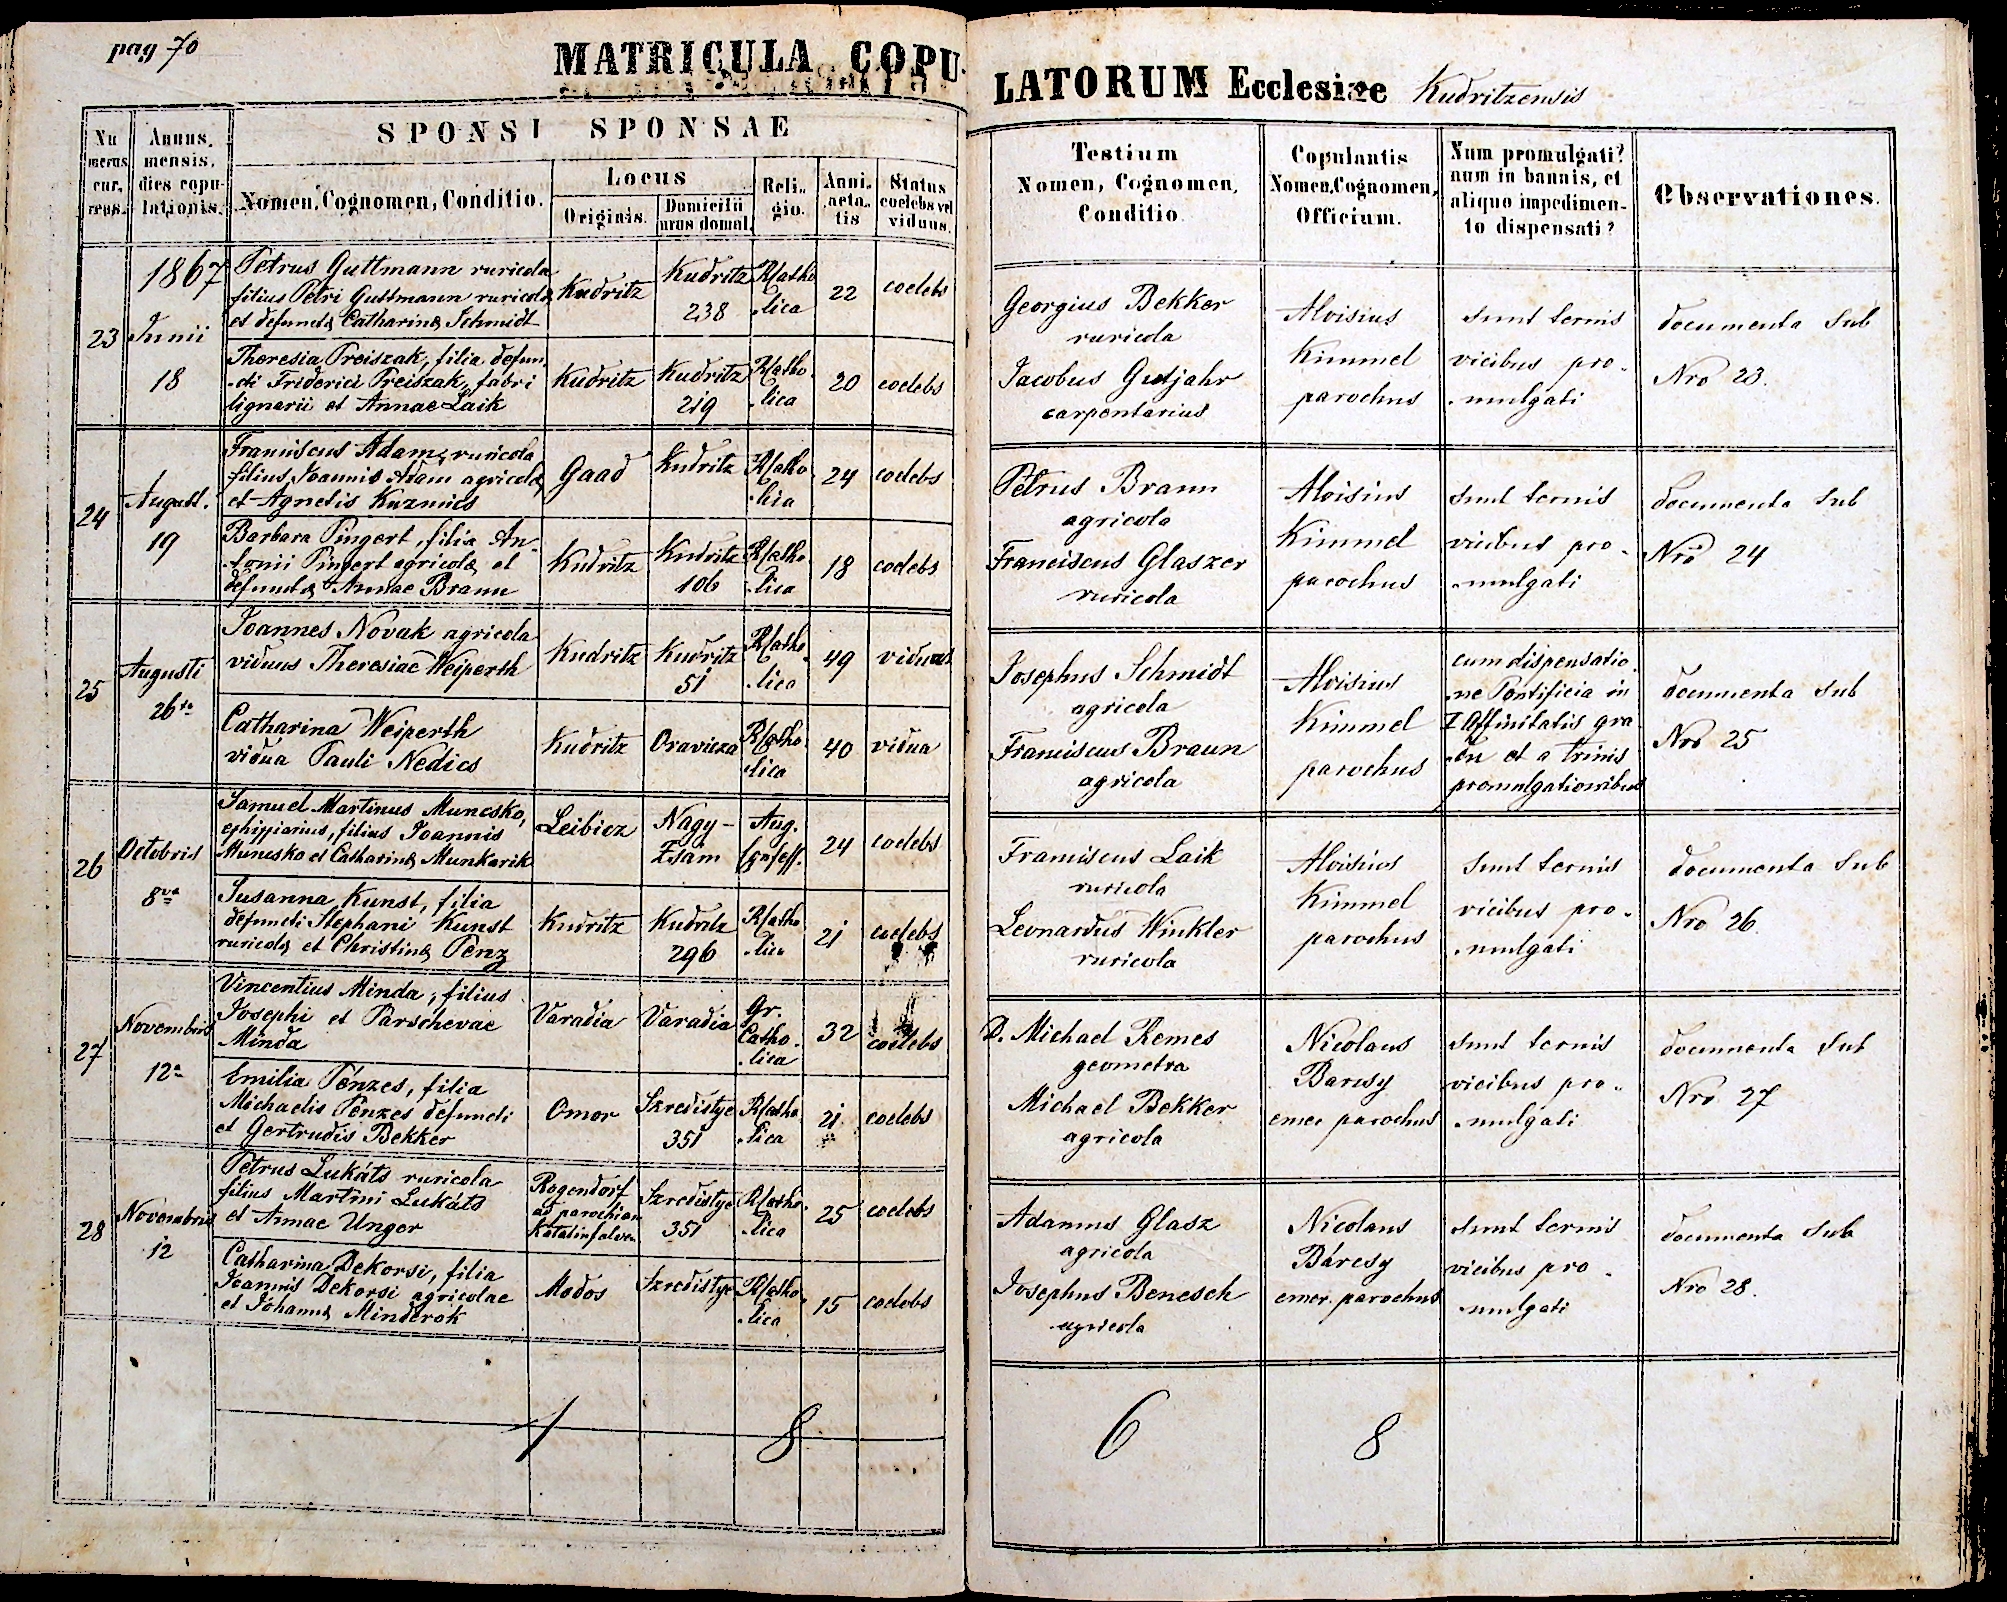 images/church_records/MARRIAGES/1871-1890M/070